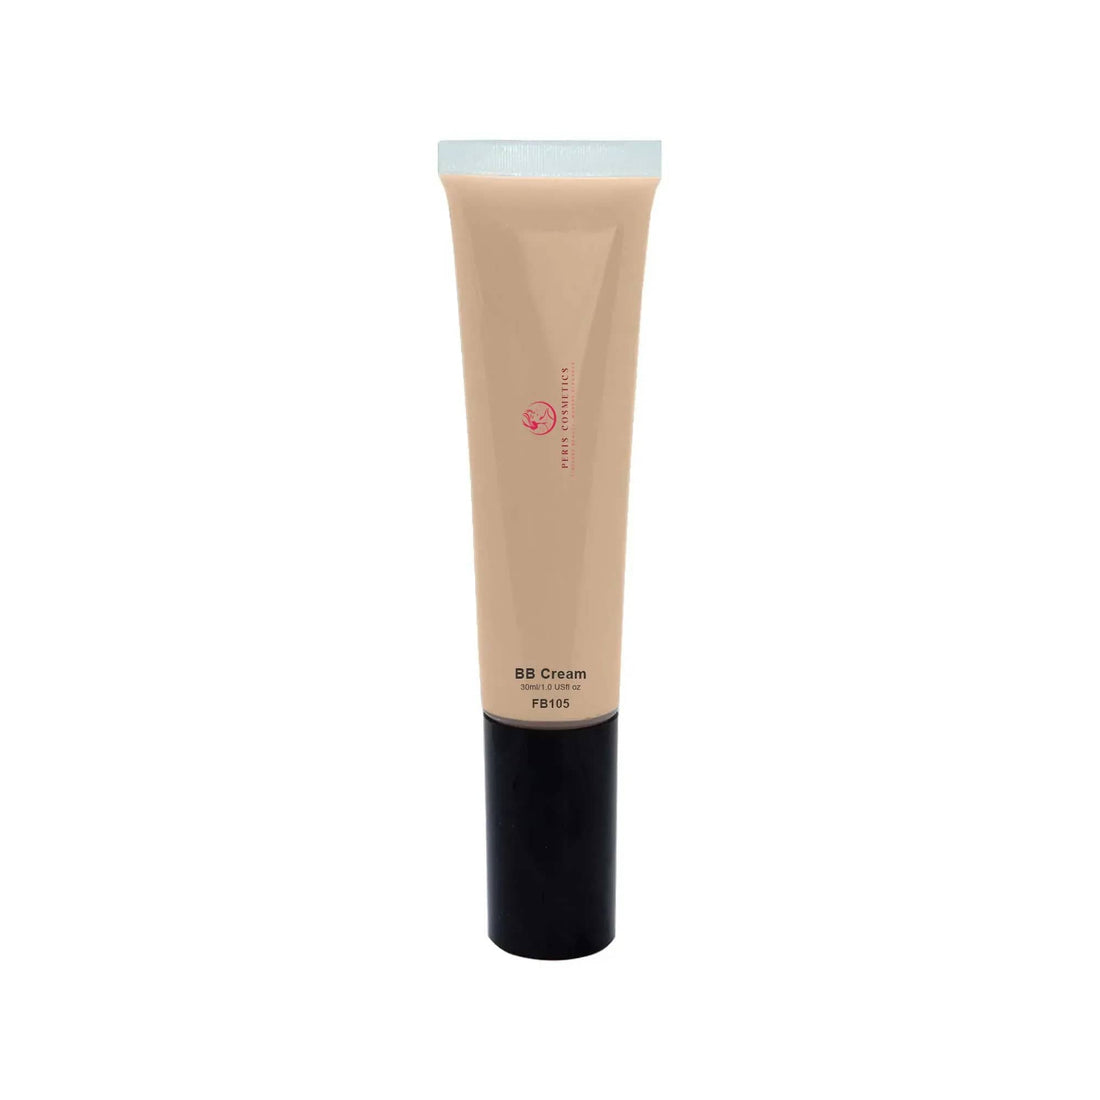 Peris Cosmetics Vanilla BB Cream with SPF: Hydration, Line Smoothing, and Sun Protection for Radiant Skin Kylie Cosmetics Amazon